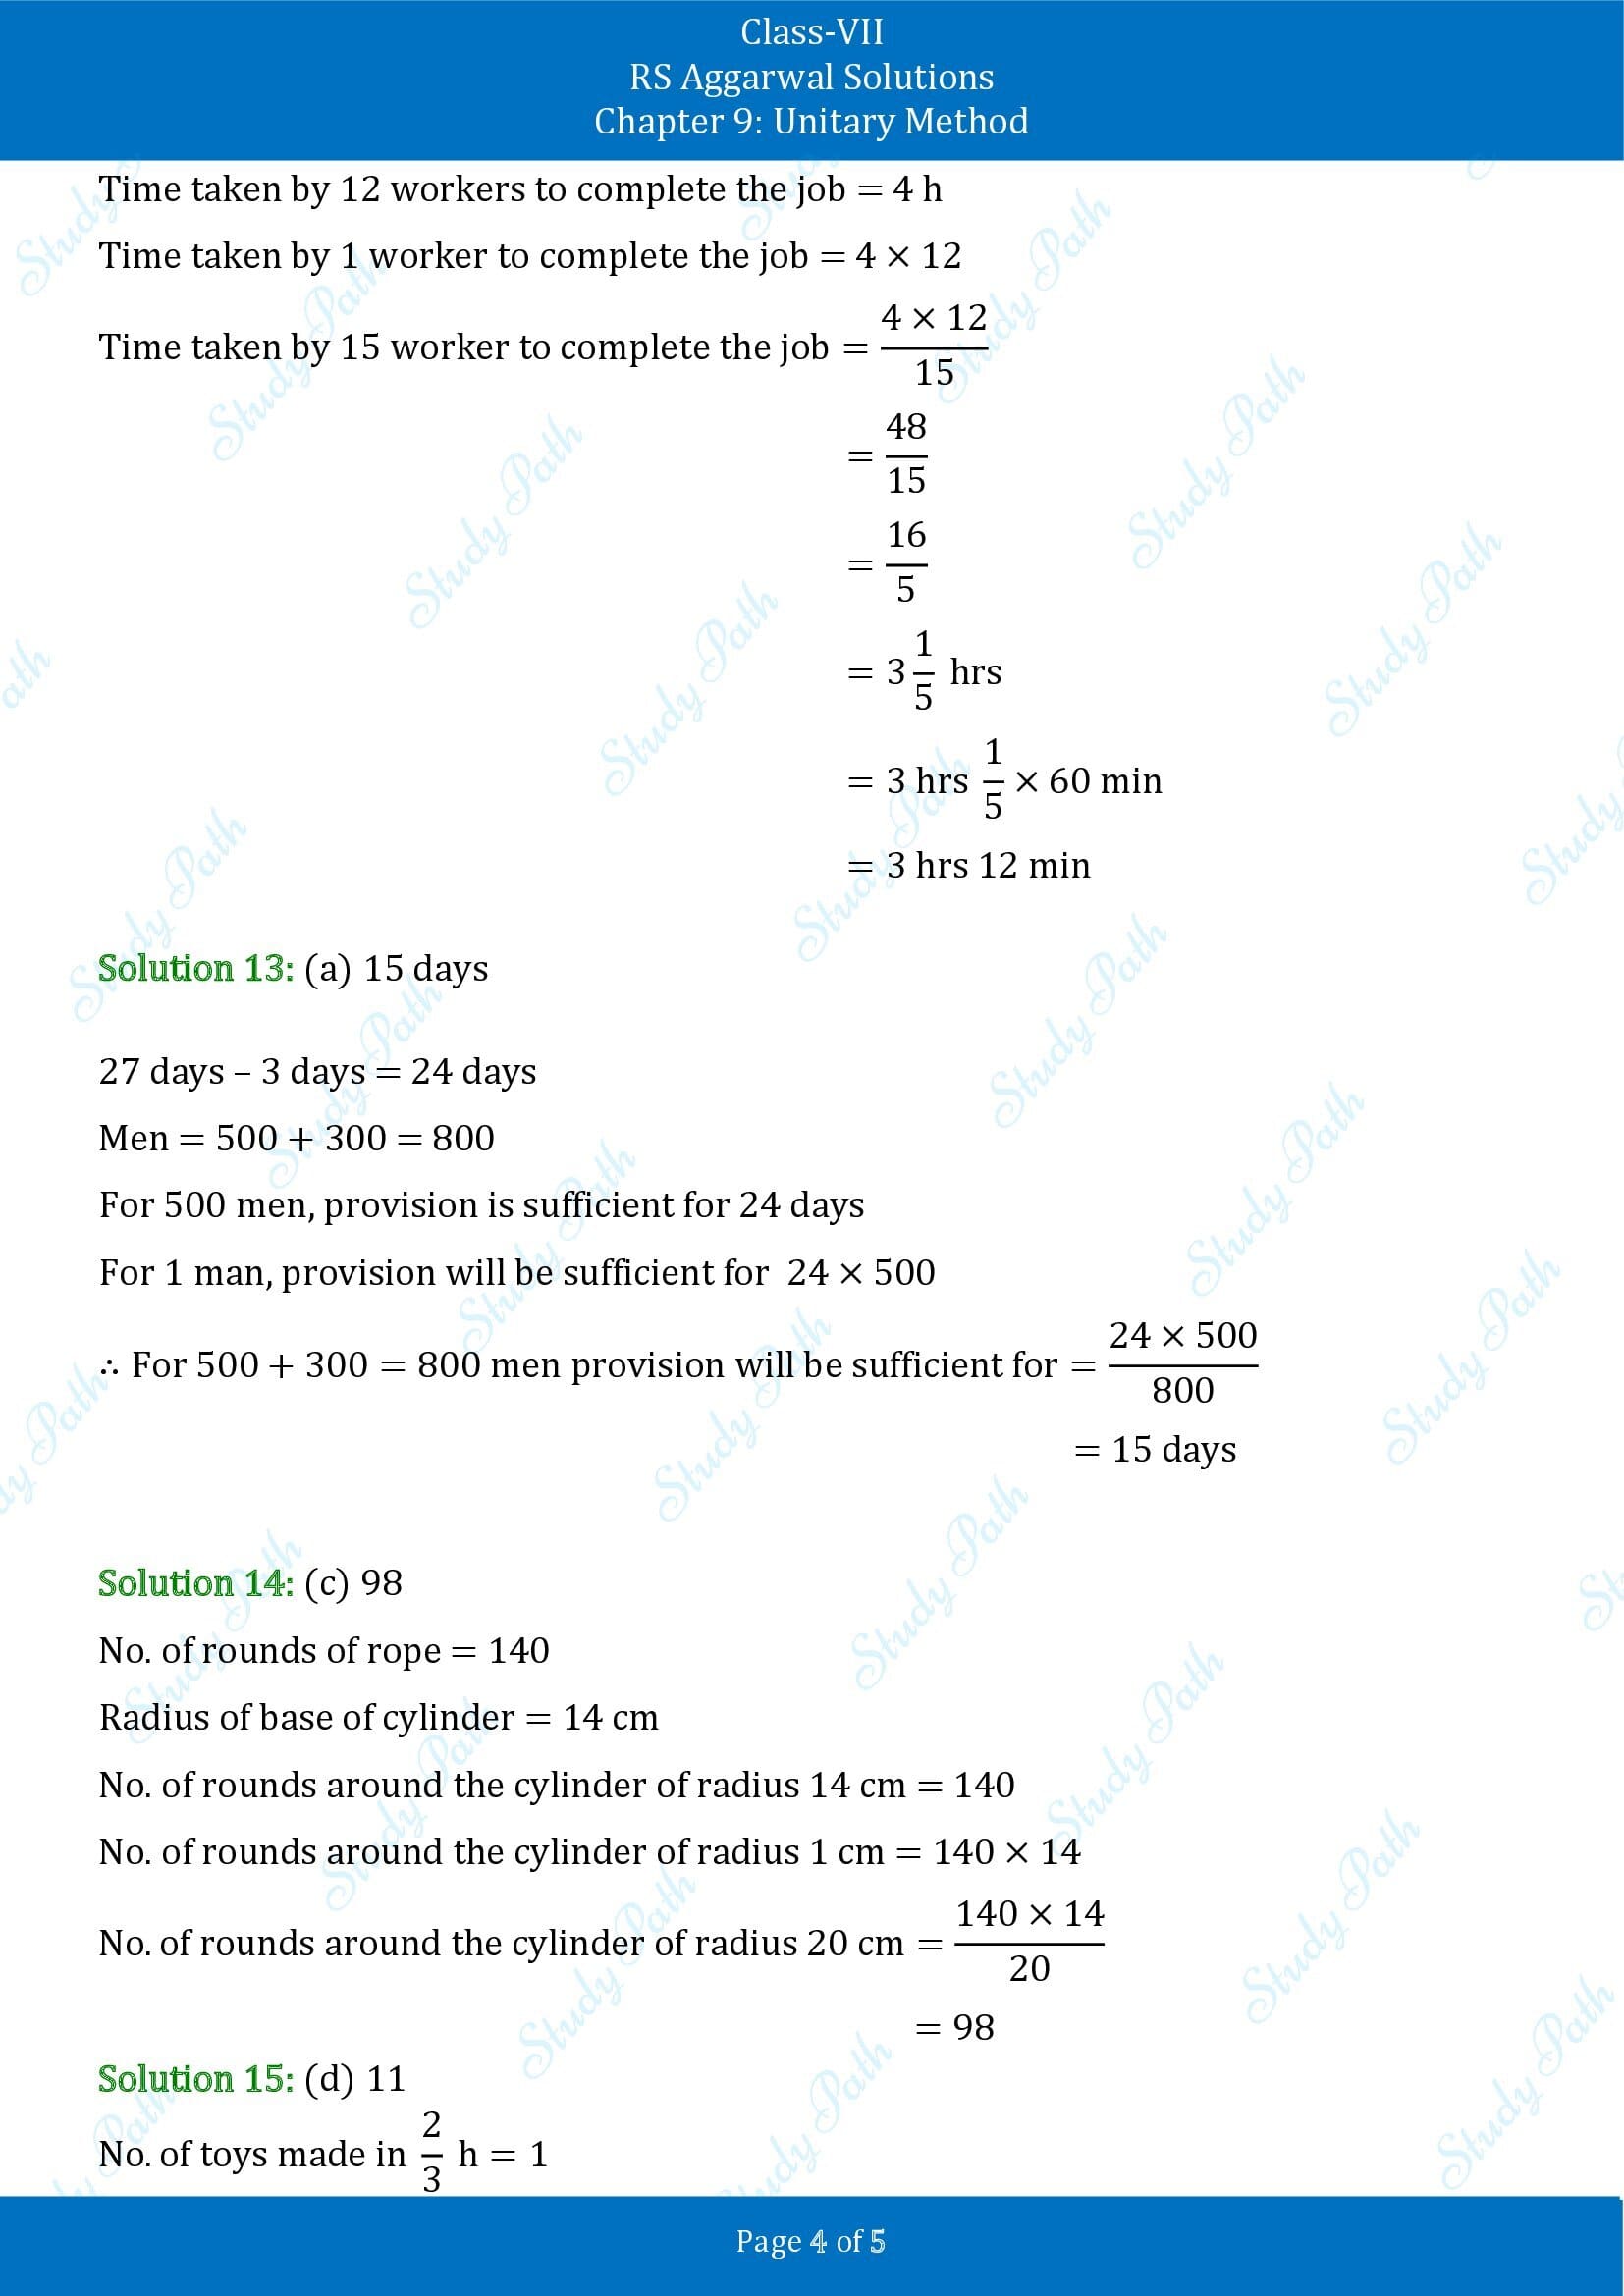 RS Aggarwal Solutions Class 7 Chapter 9 Unitary Method Exercise 9C MCQs 00004